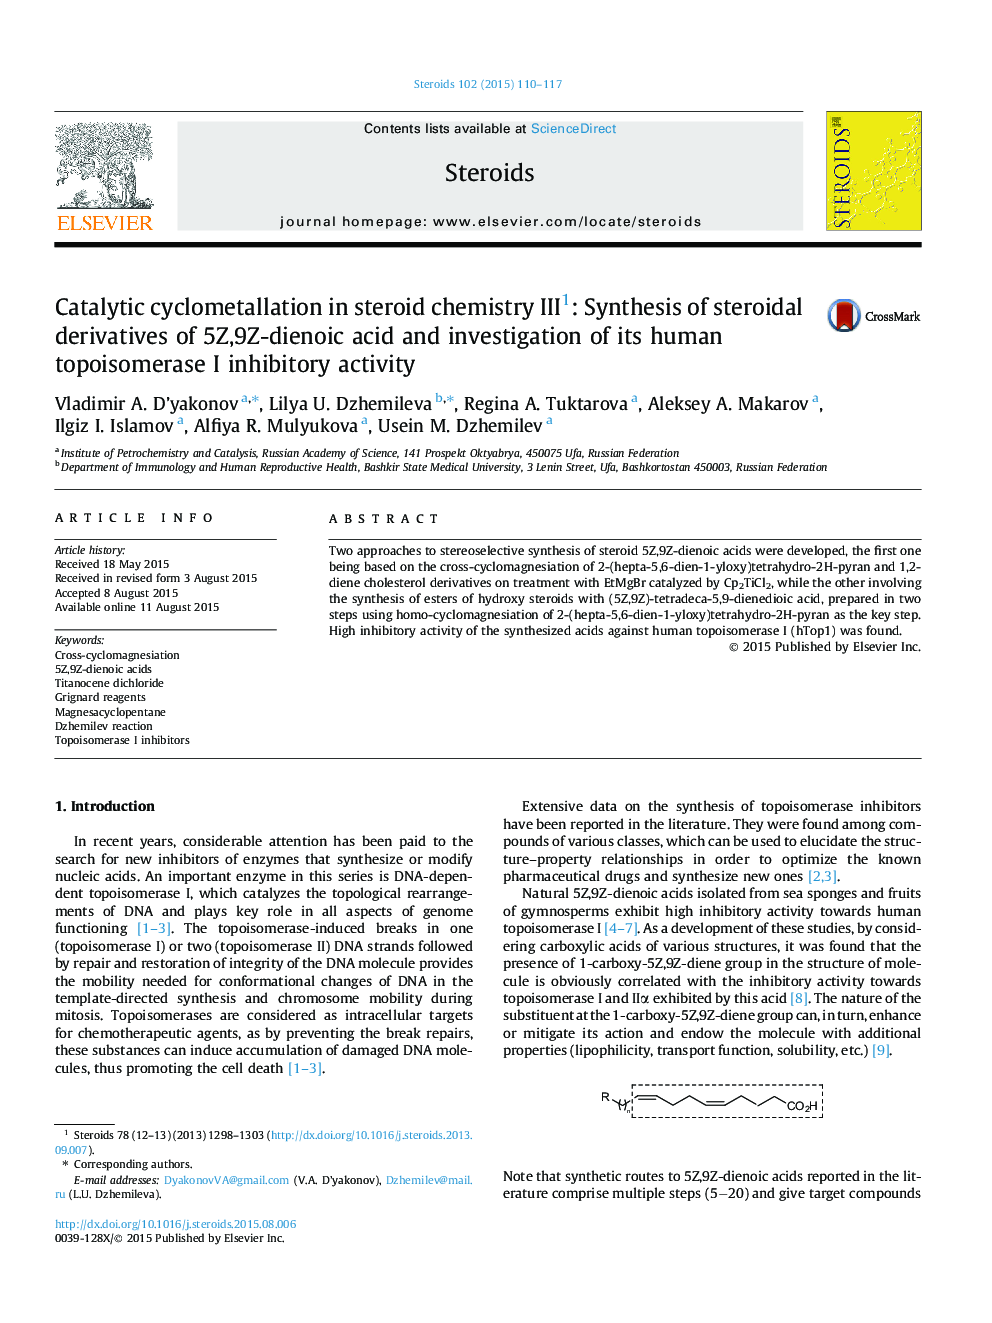 Catalytic cyclometallation in steroid chemistry III1: Synthesis of steroidal derivatives of 5Z,9Z-dienoic acid and investigation of its human topoisomerase I inhibitory activity